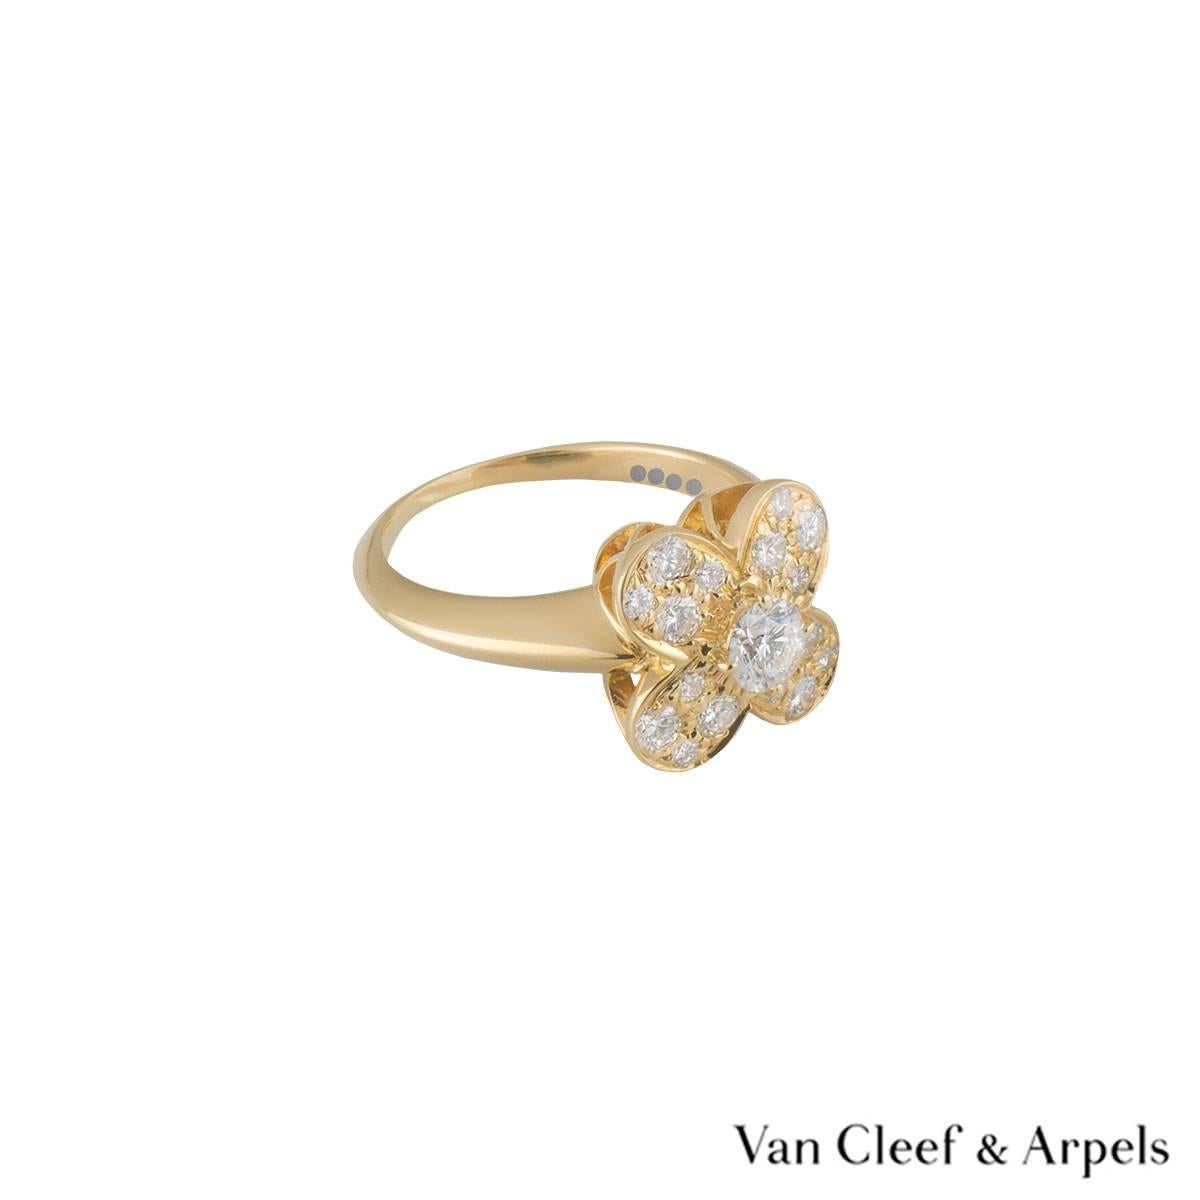 A beautiful 18k yellow gold Van Cleef & Arpels diamond ring from the Alhambra collection. The central flower motif is set with a single claw set round brilliant cut diamond weighing approximately 0.30ct, G colour and VS clarity. The petals of the